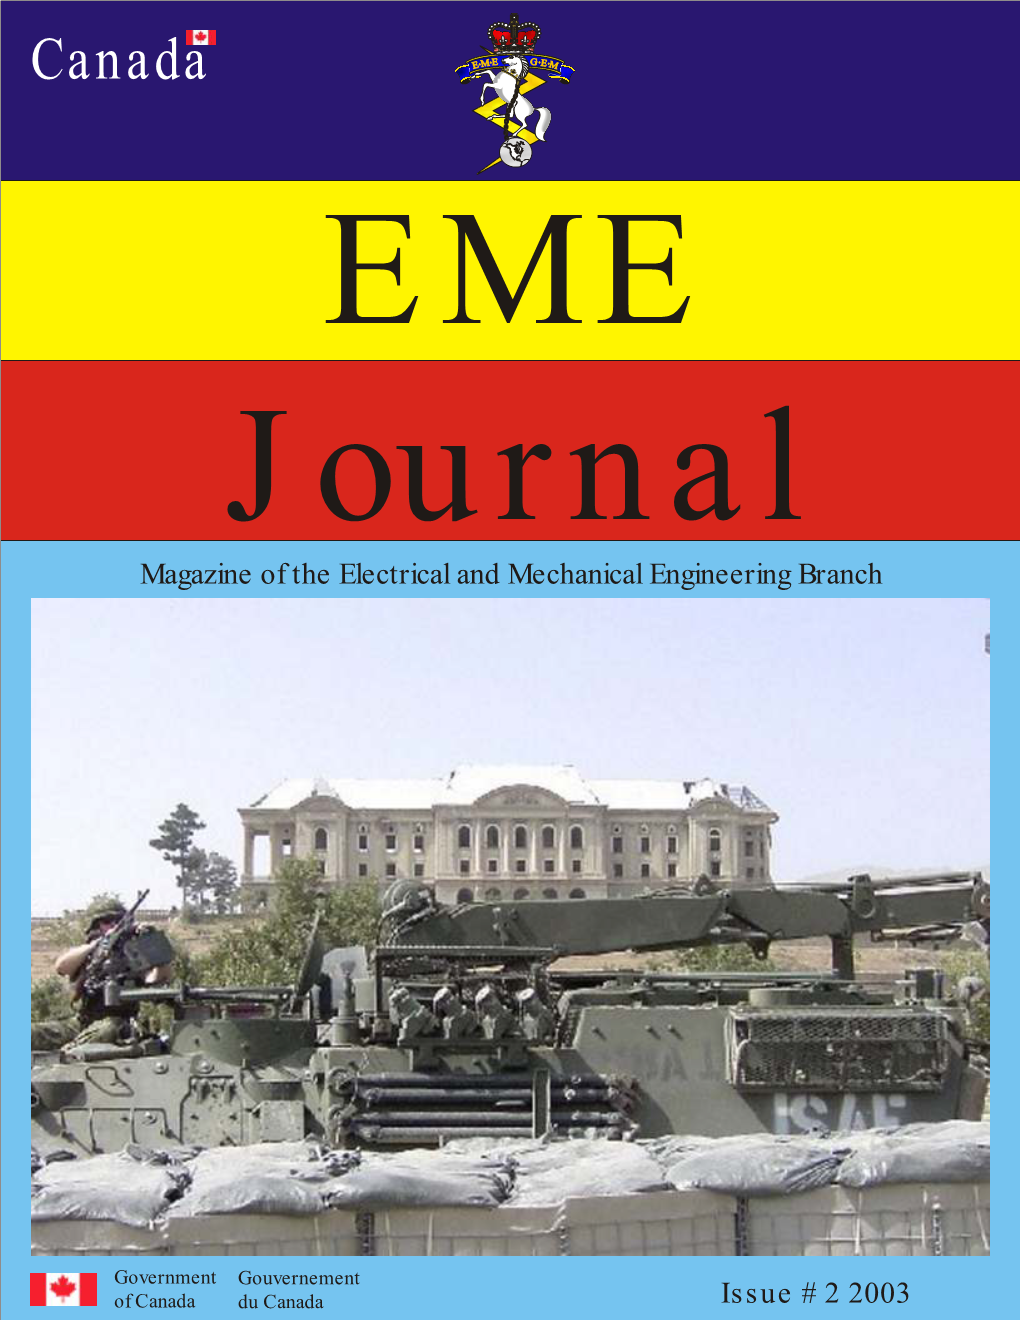 Canada EME Journal Magazine of the Electrical and Mechanical Engineering Branch